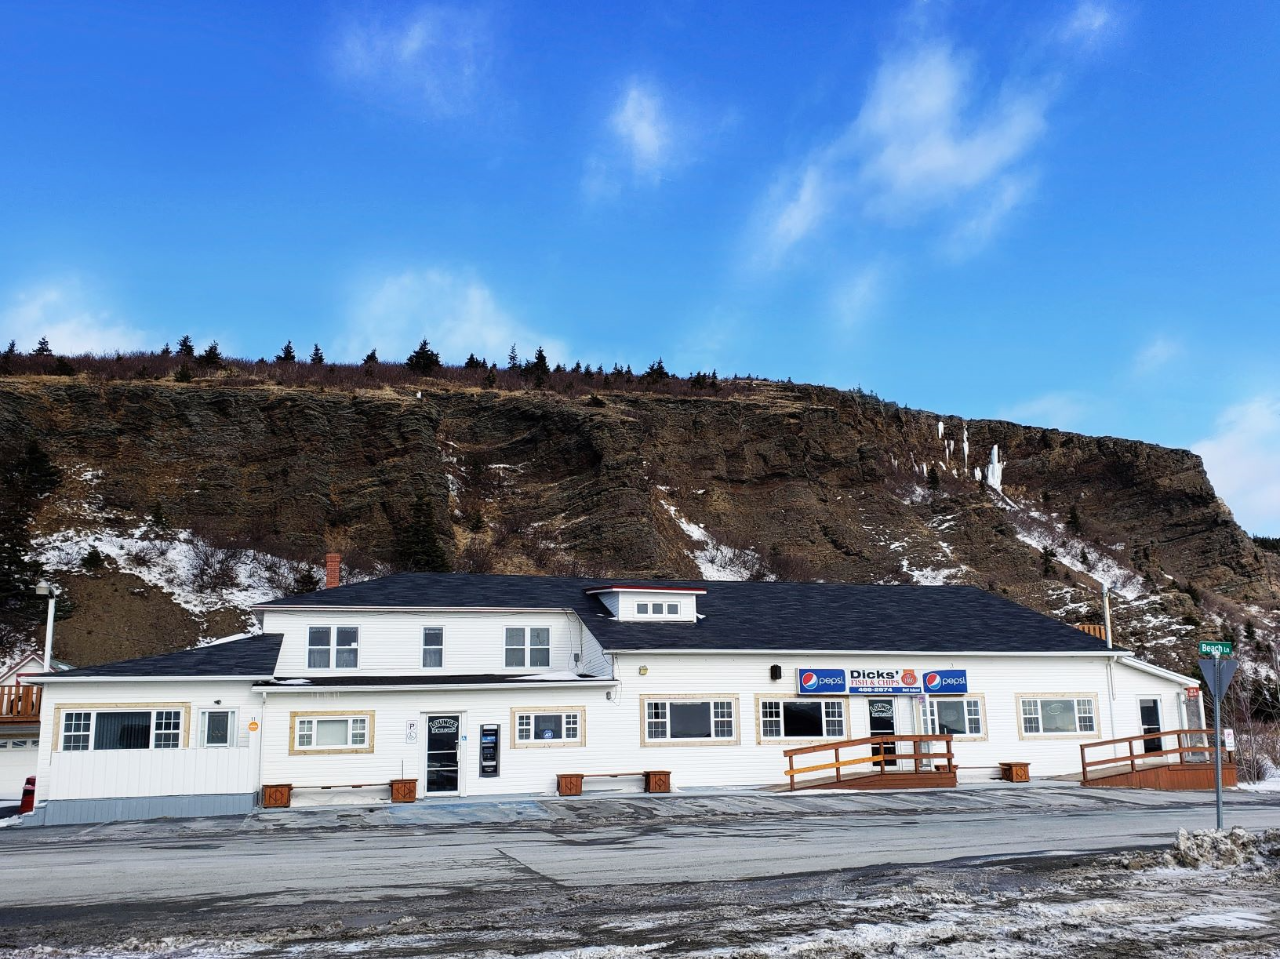 Dicks' Fish and Chips - Bell Island - Newfoundland and Labrador, Canada